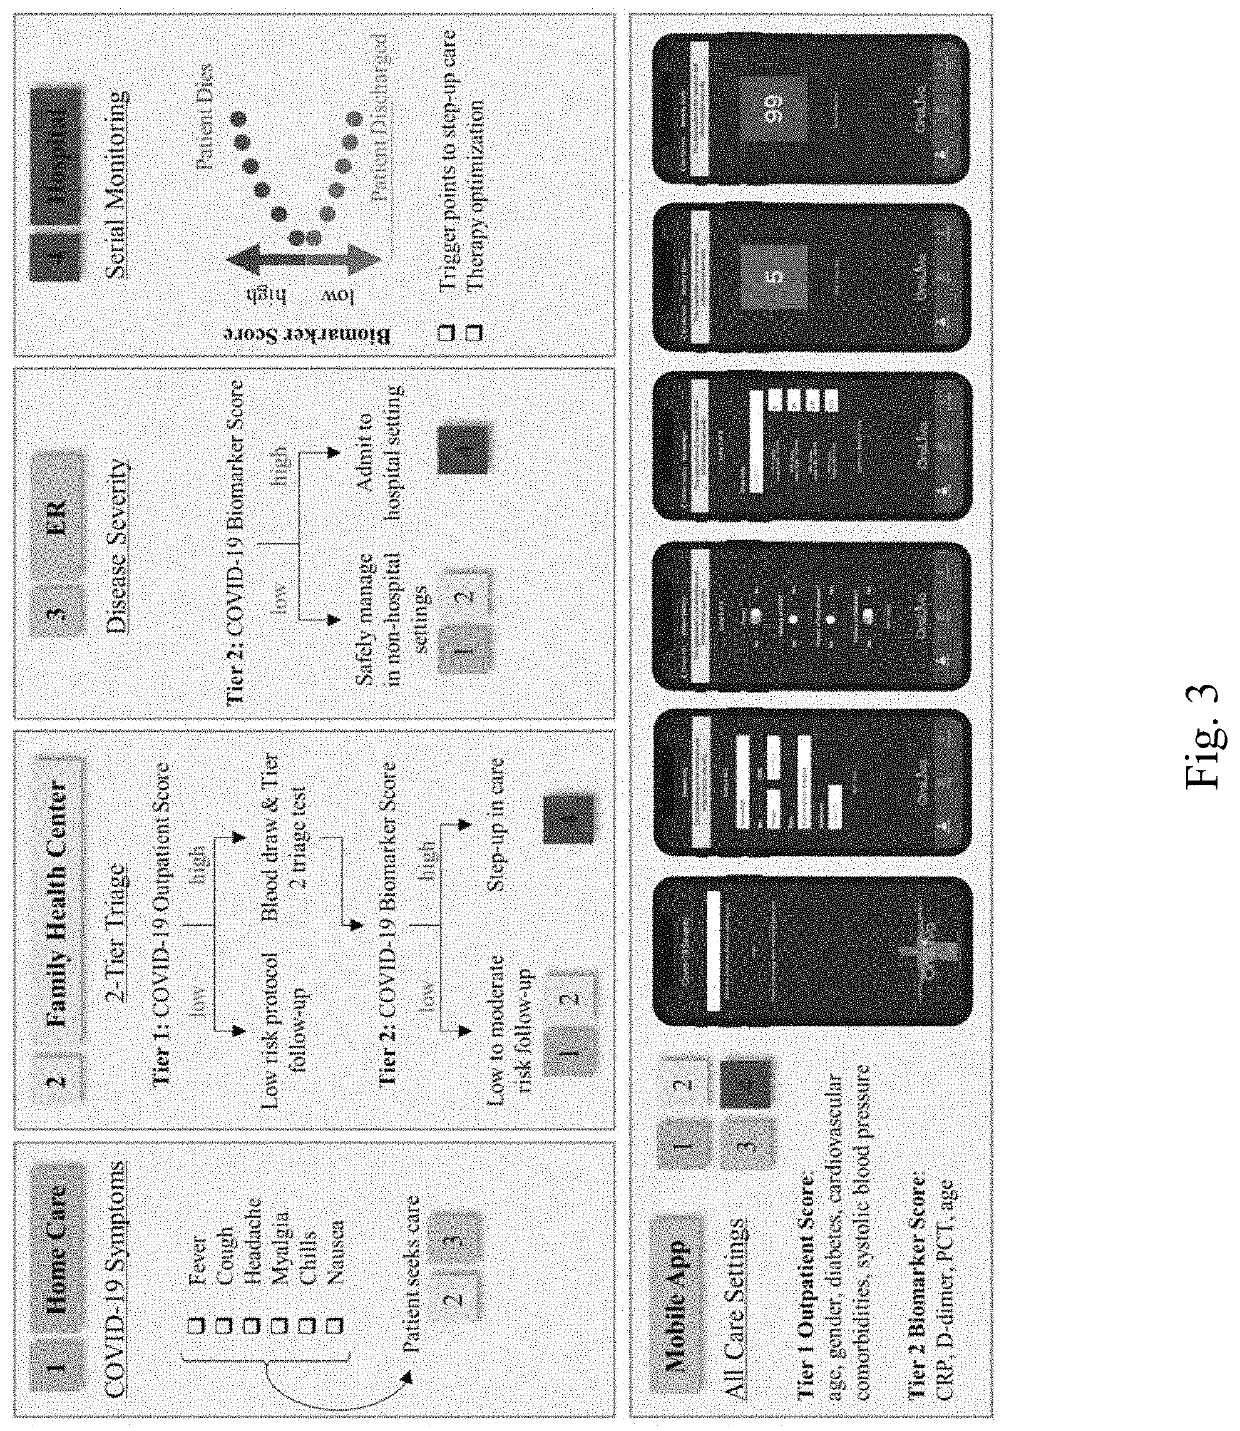 System and Method for Disease Surveillance and Disease Severity Monitoring for COVID-19